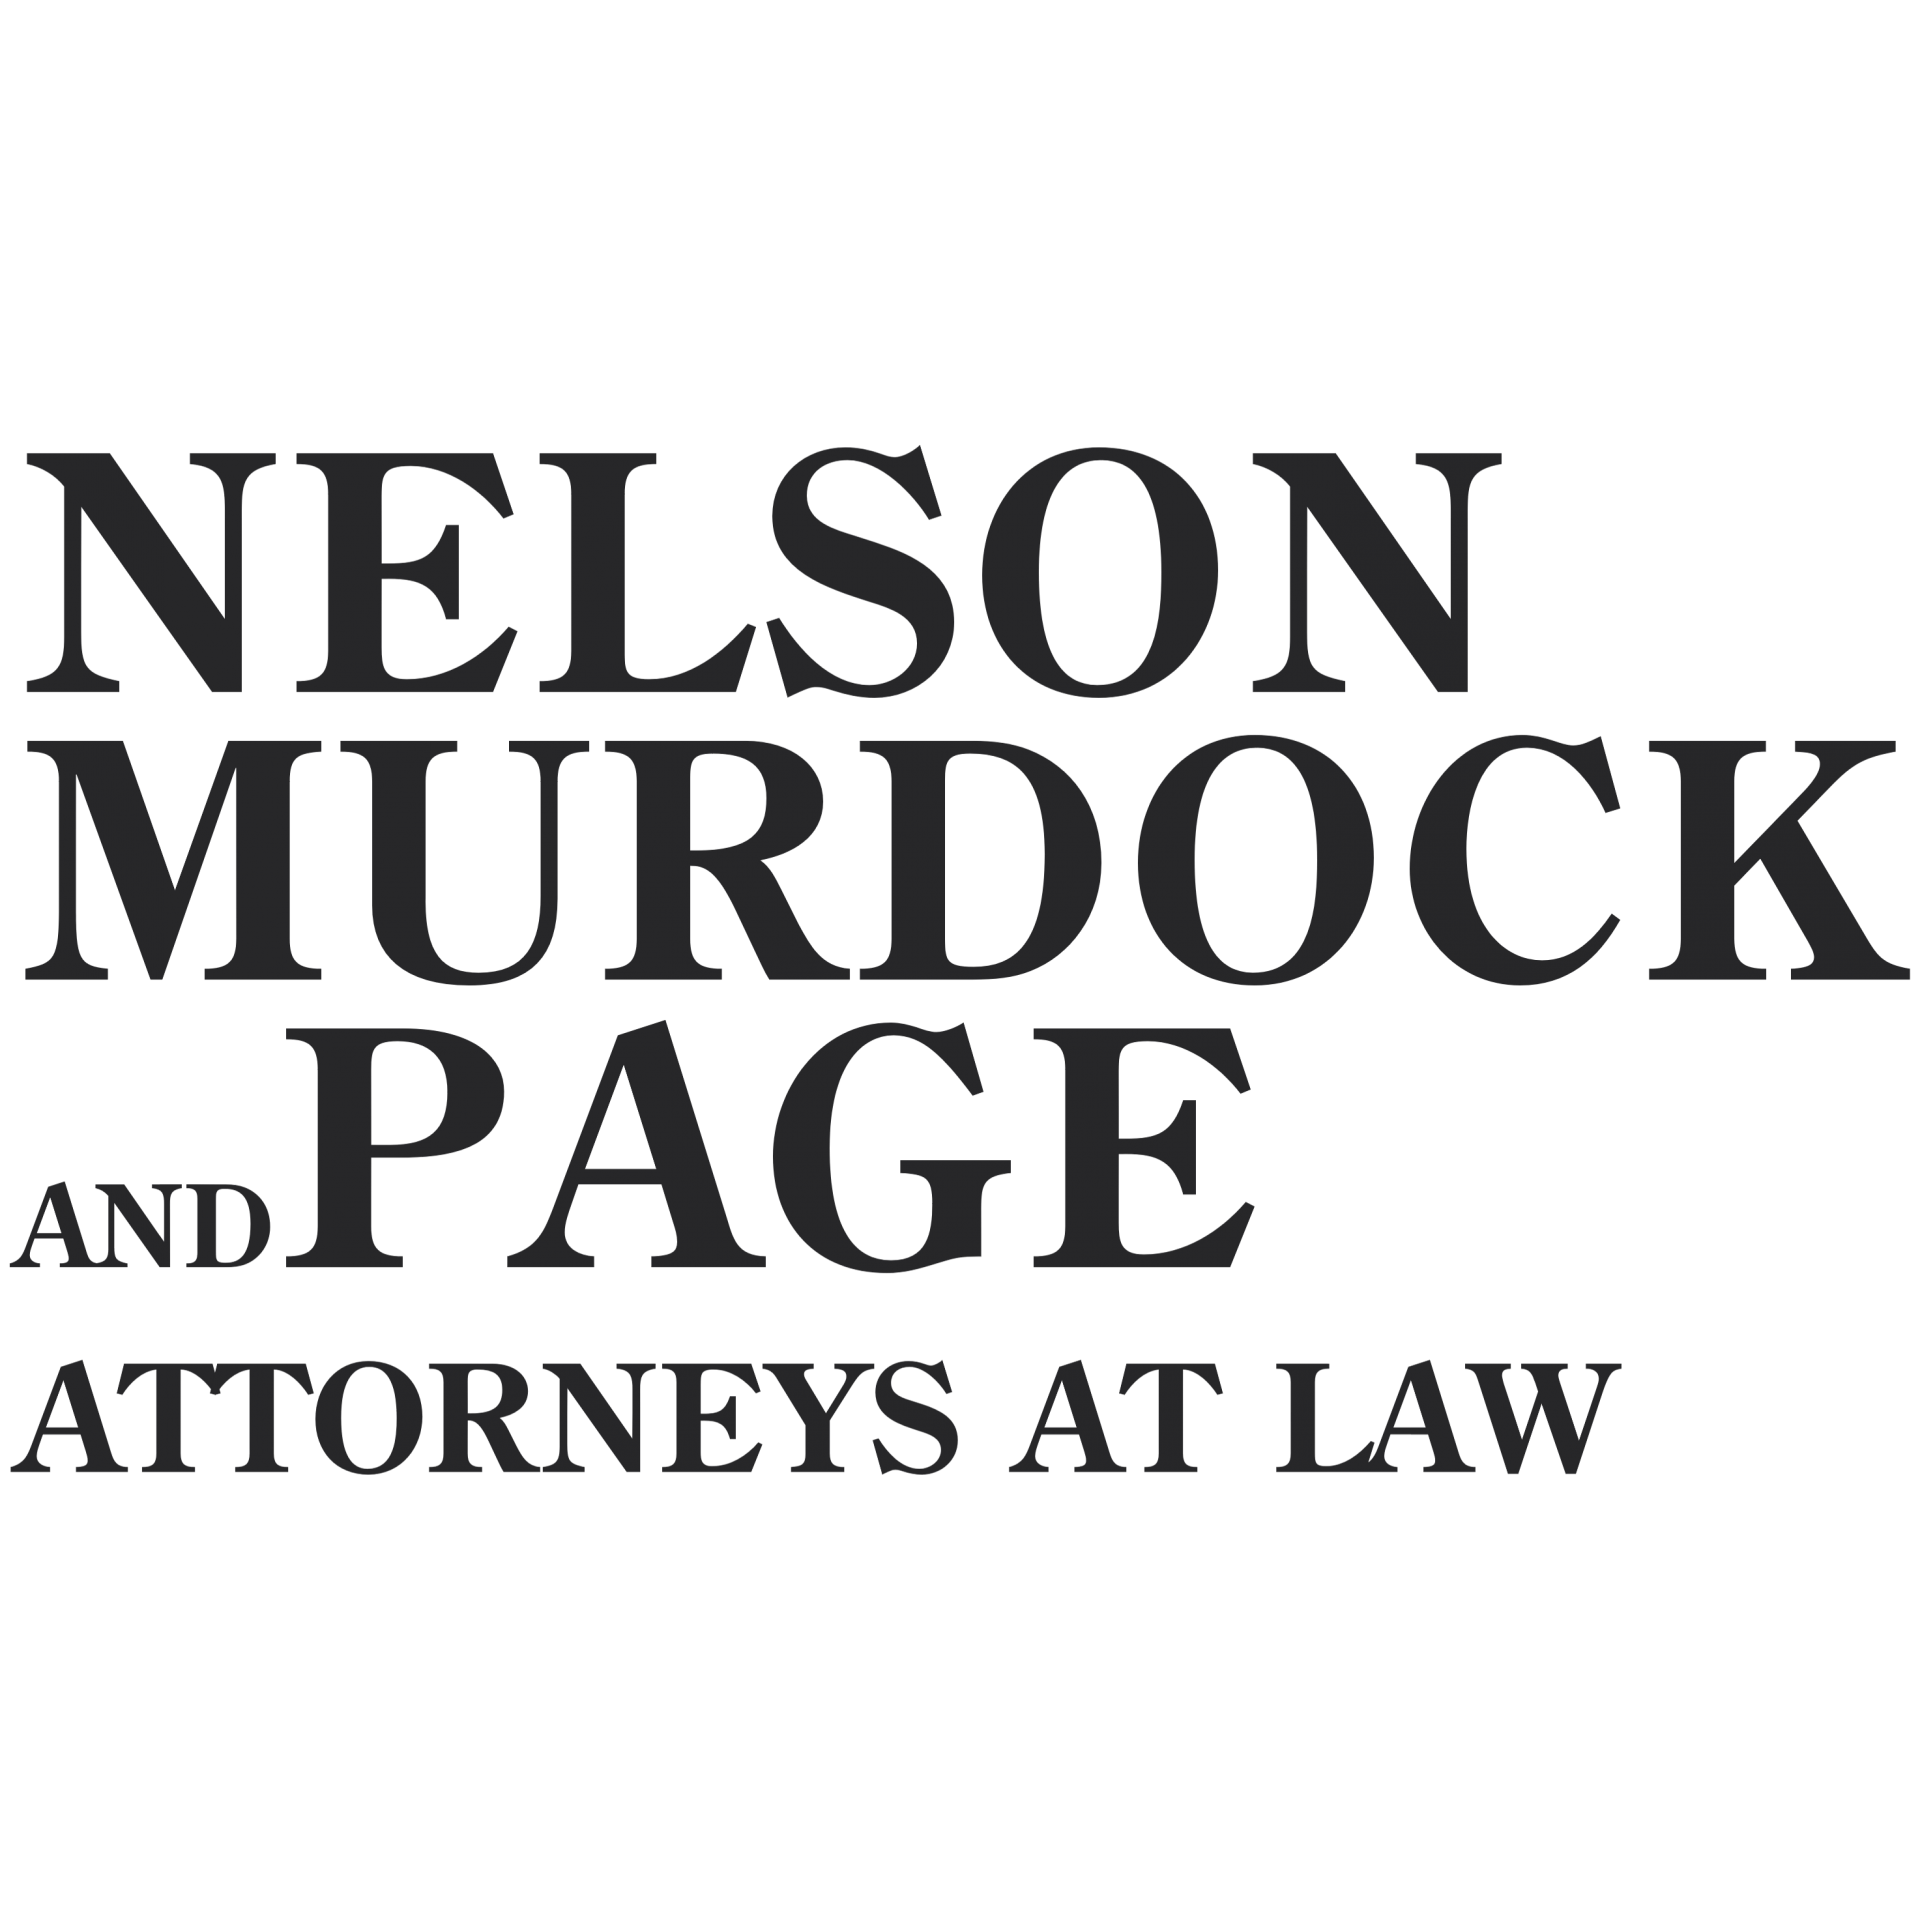 Nelson murdock and page logo